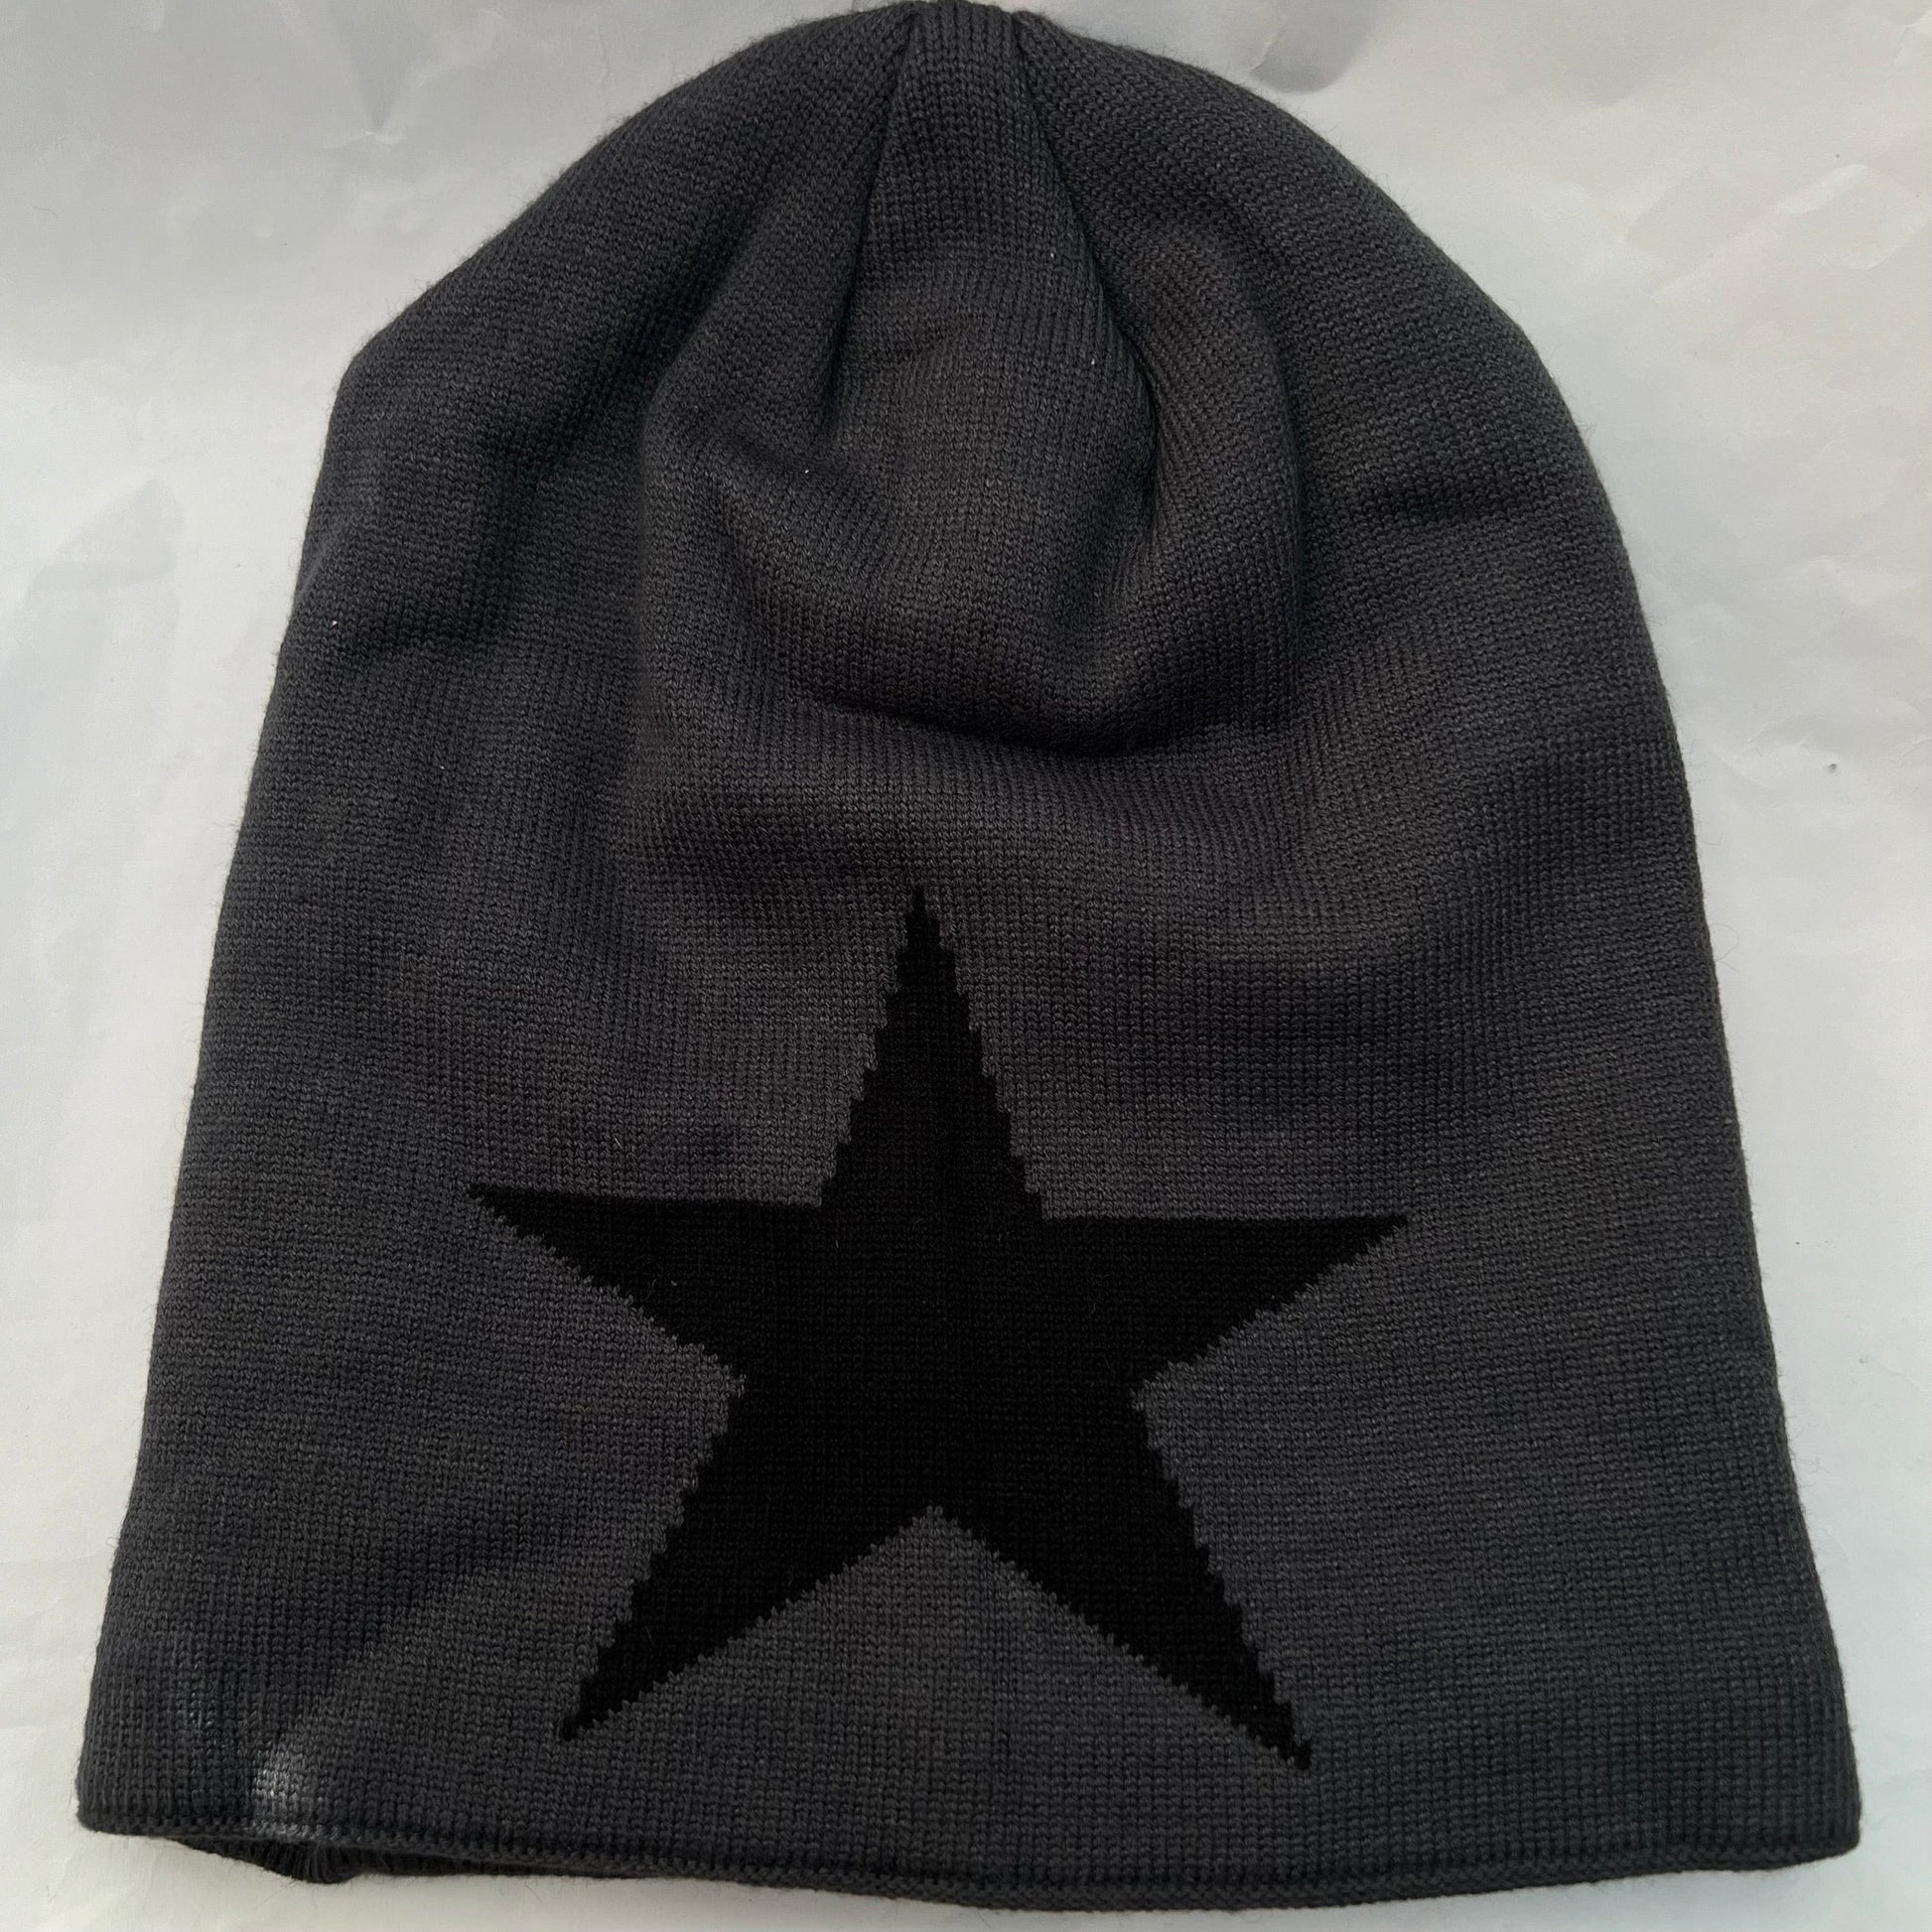 Warm Winter Beanie hat Insulated Thermal lined Comfort hat Star Grey Hat